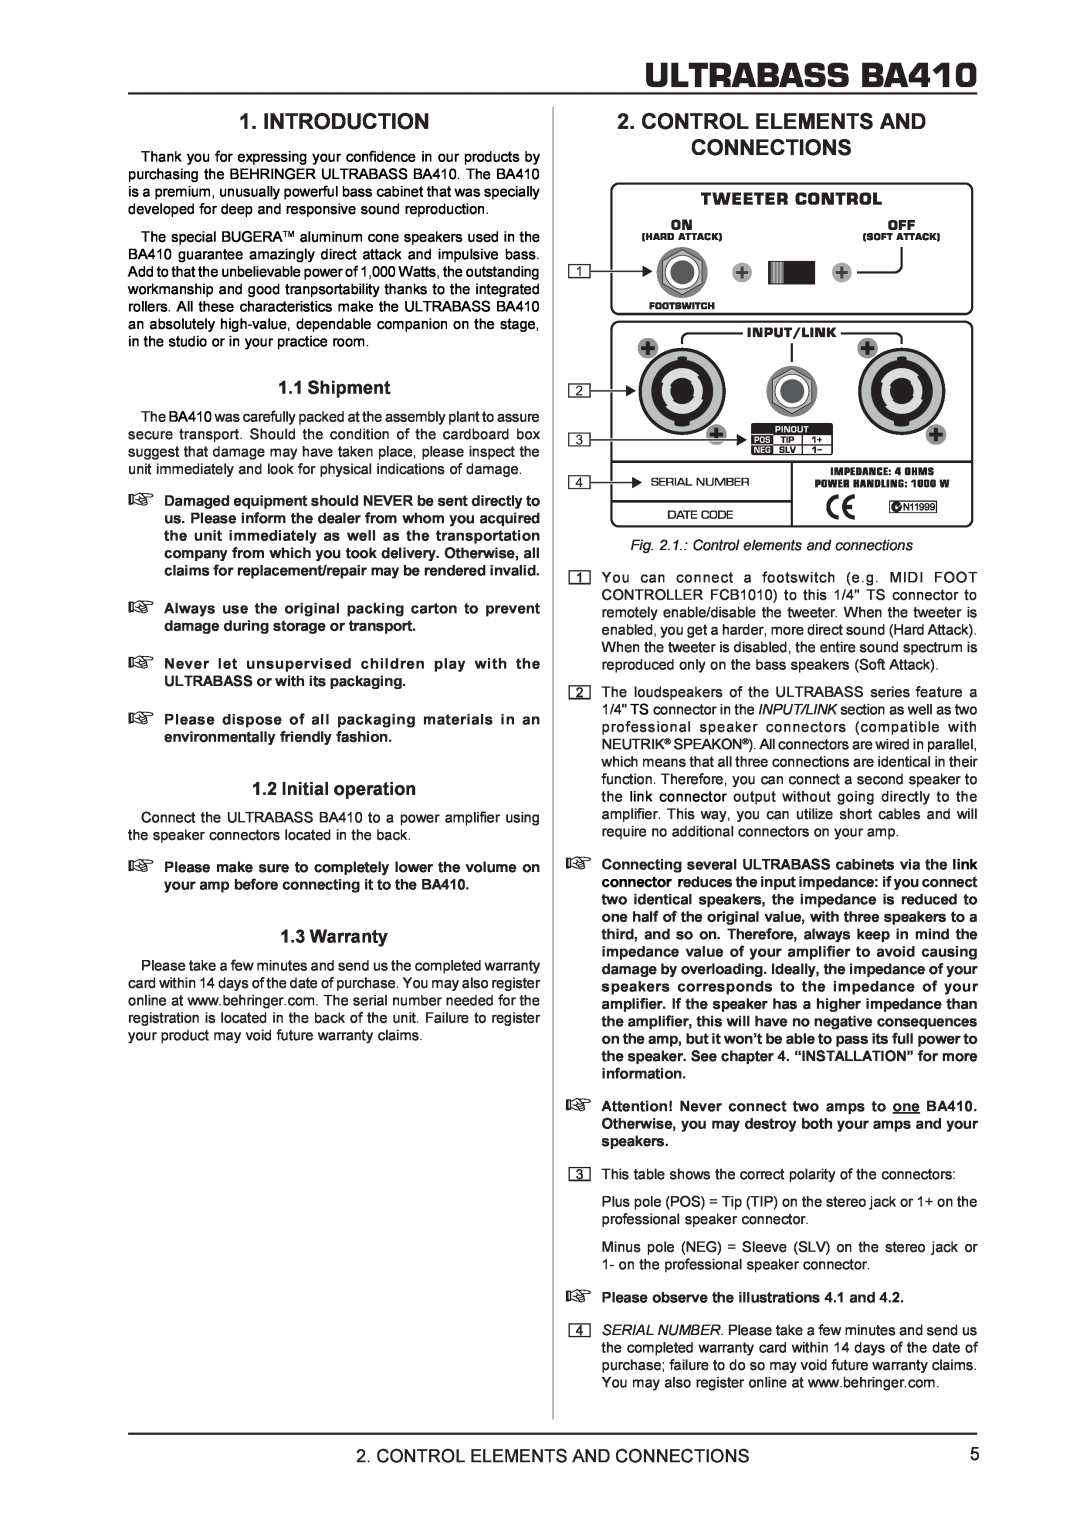 Behringer manual Introduction, Control Elements And Connections, ULTRABASS BA410, Shipment, Initial operation, Warranty 